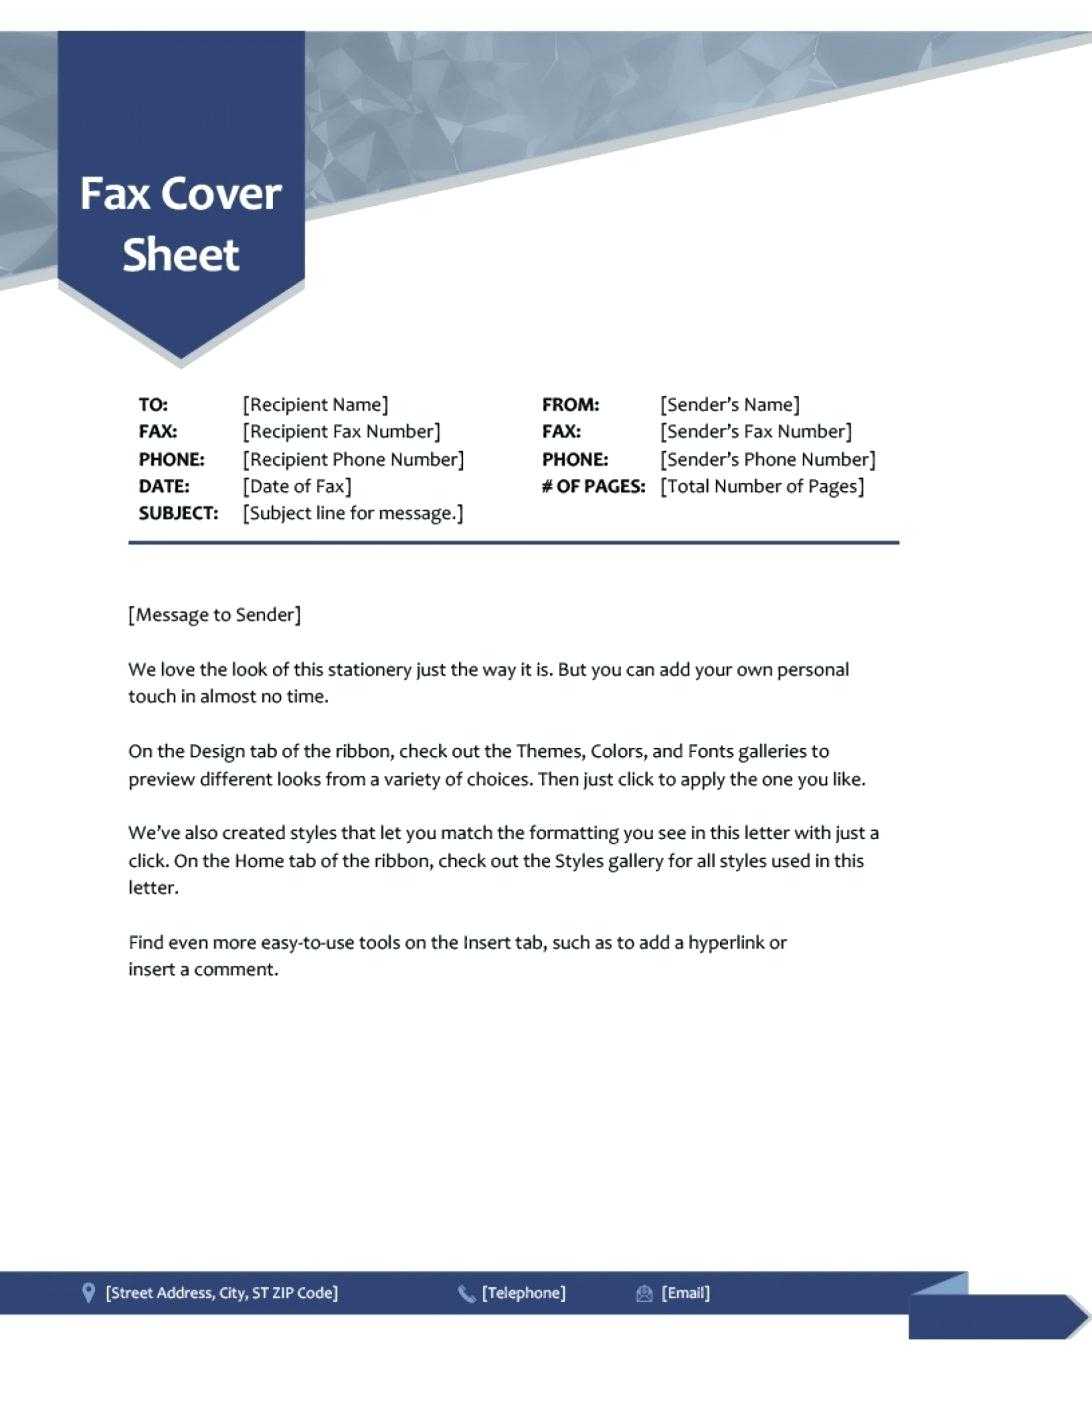 Resume Free Cover Letter Samples In Word Extraordinary In Fax Cover Sheet Template Word 2010